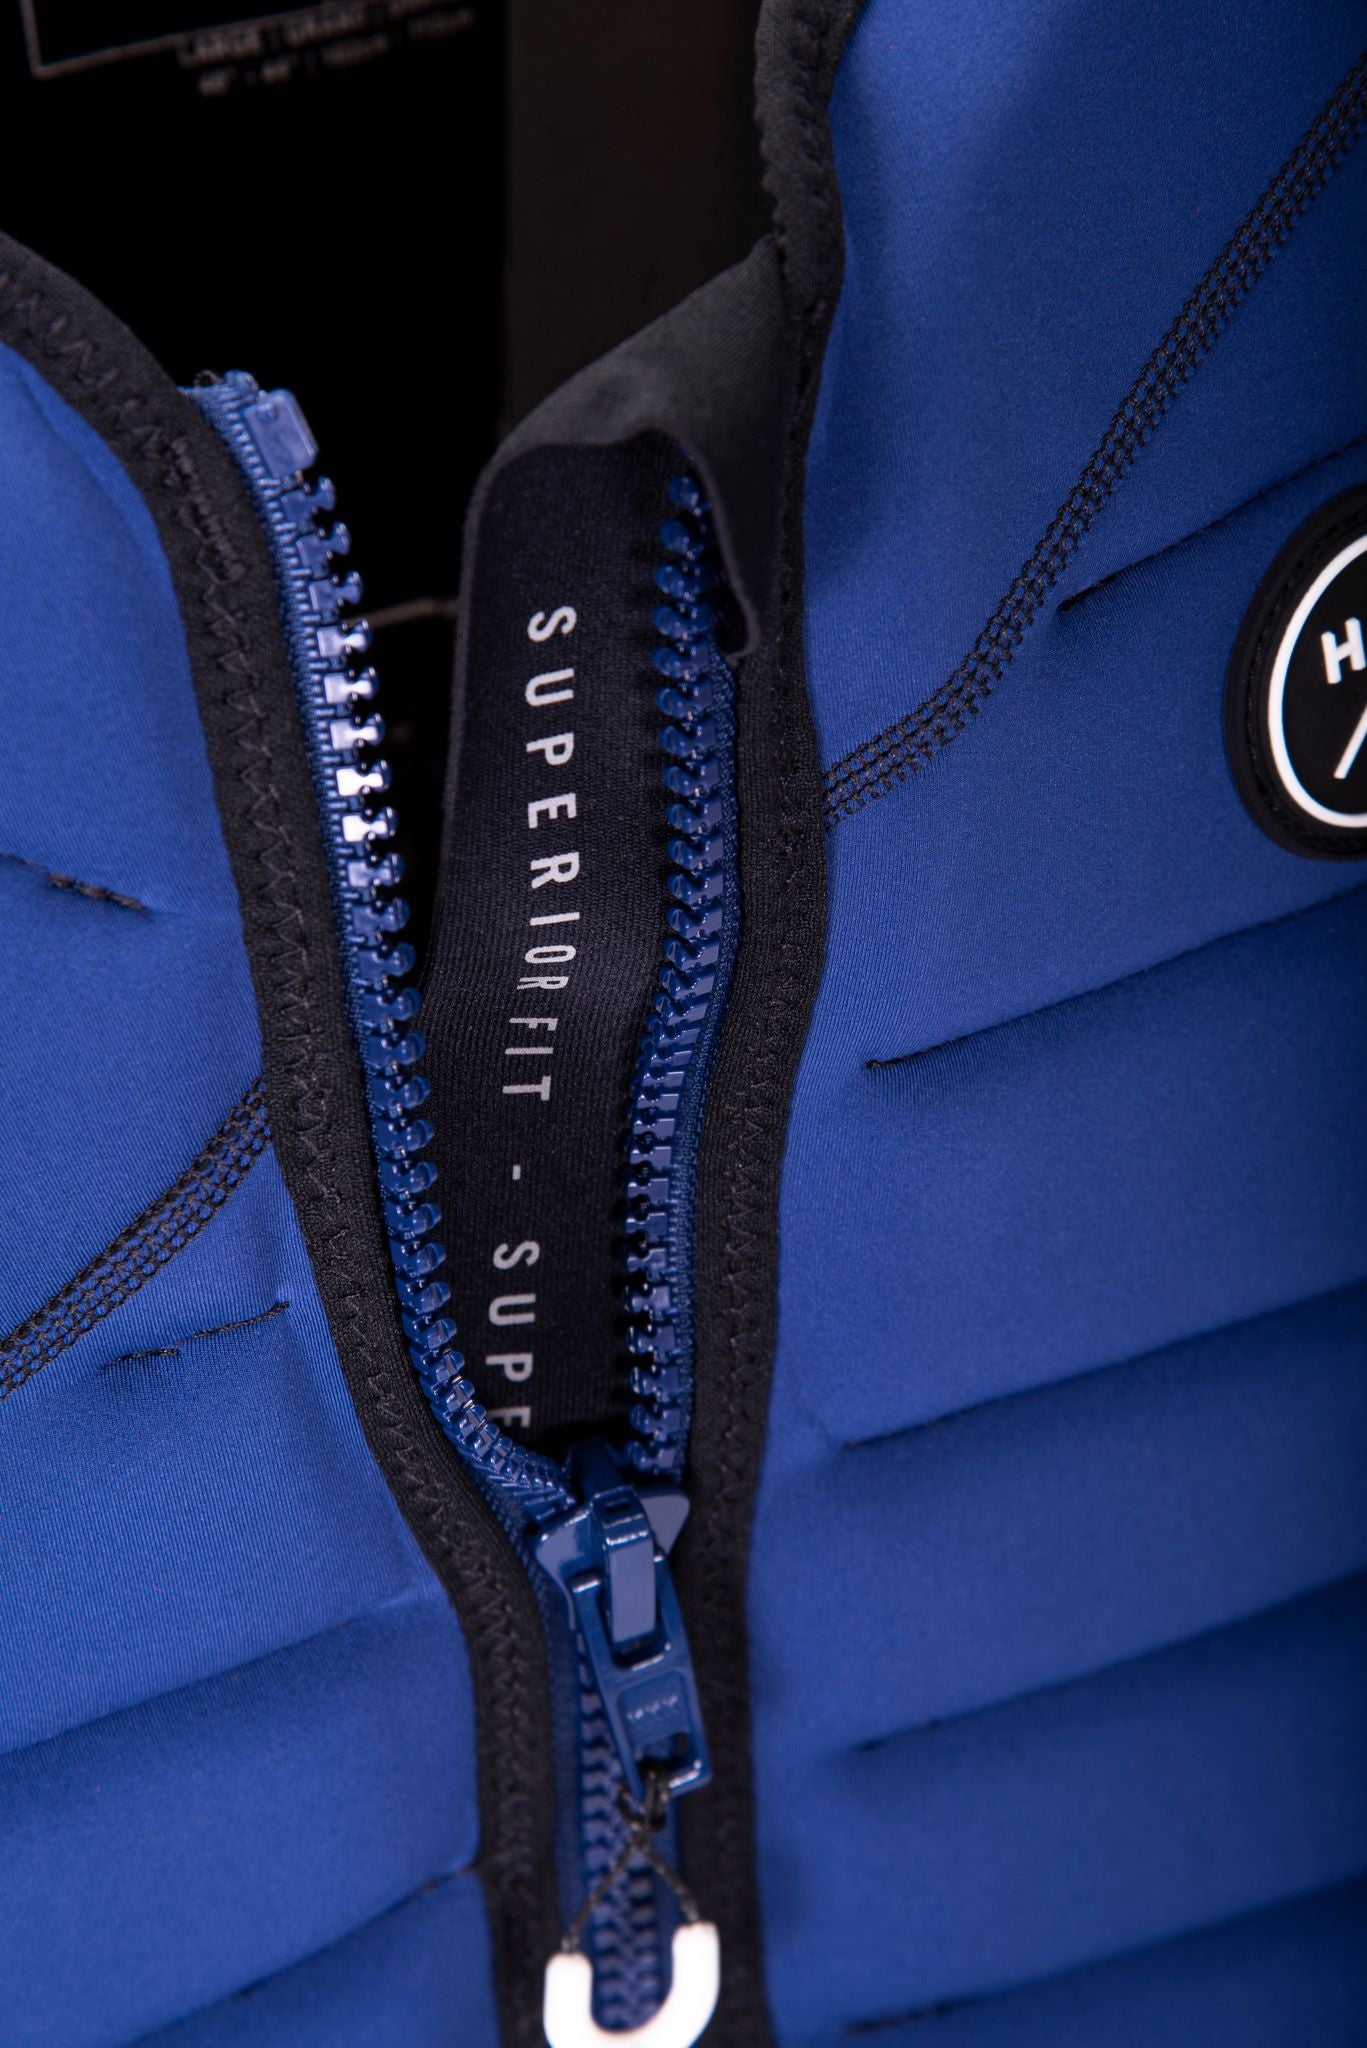 A blue zippered jacket with the word Hyperlite on it, perfect for wakeboarders.